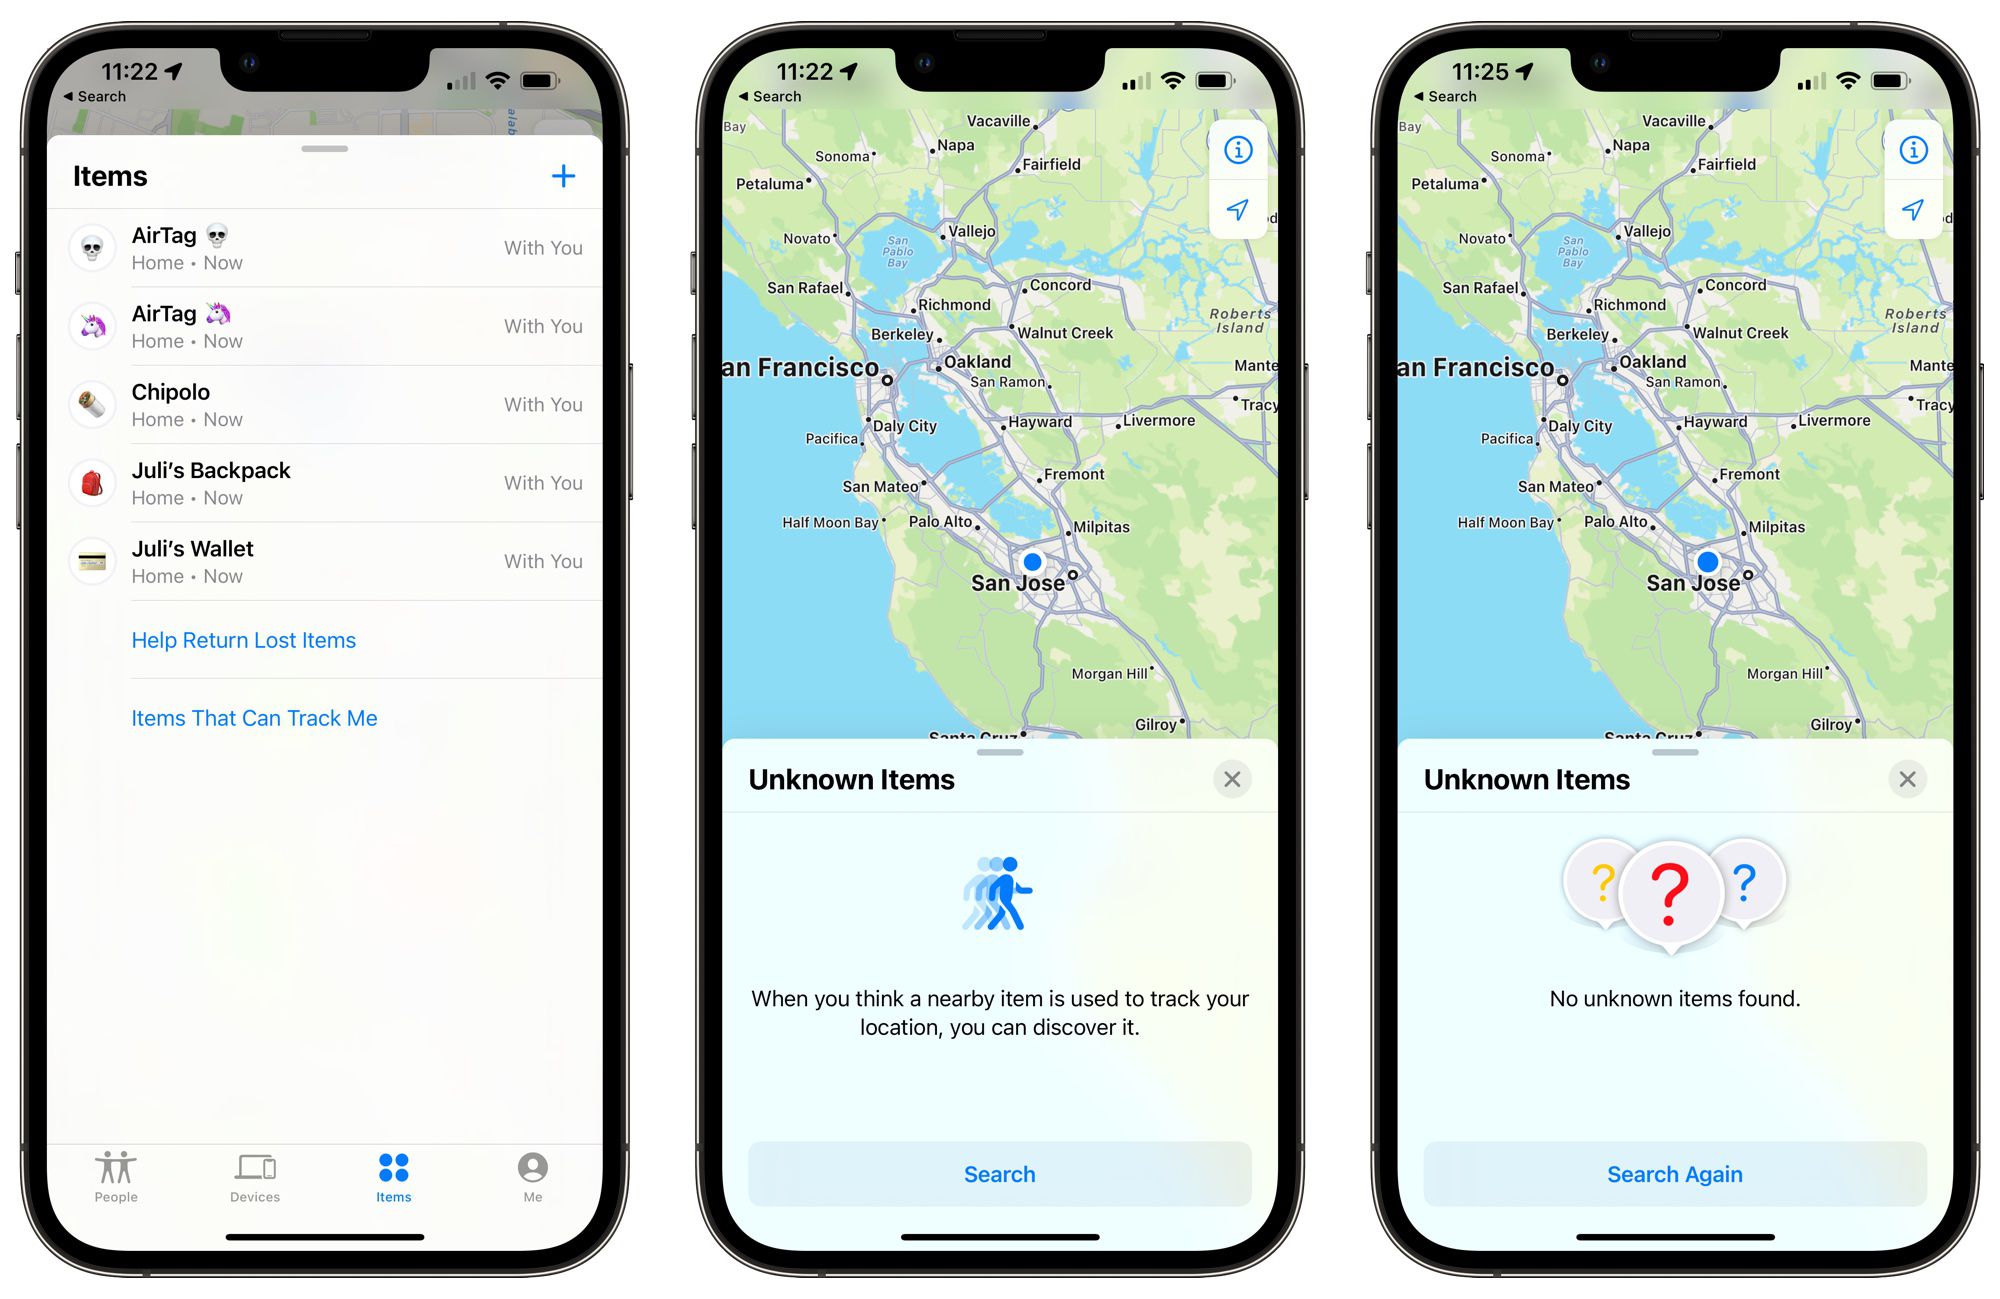 AirTags and unknown items in Find My app